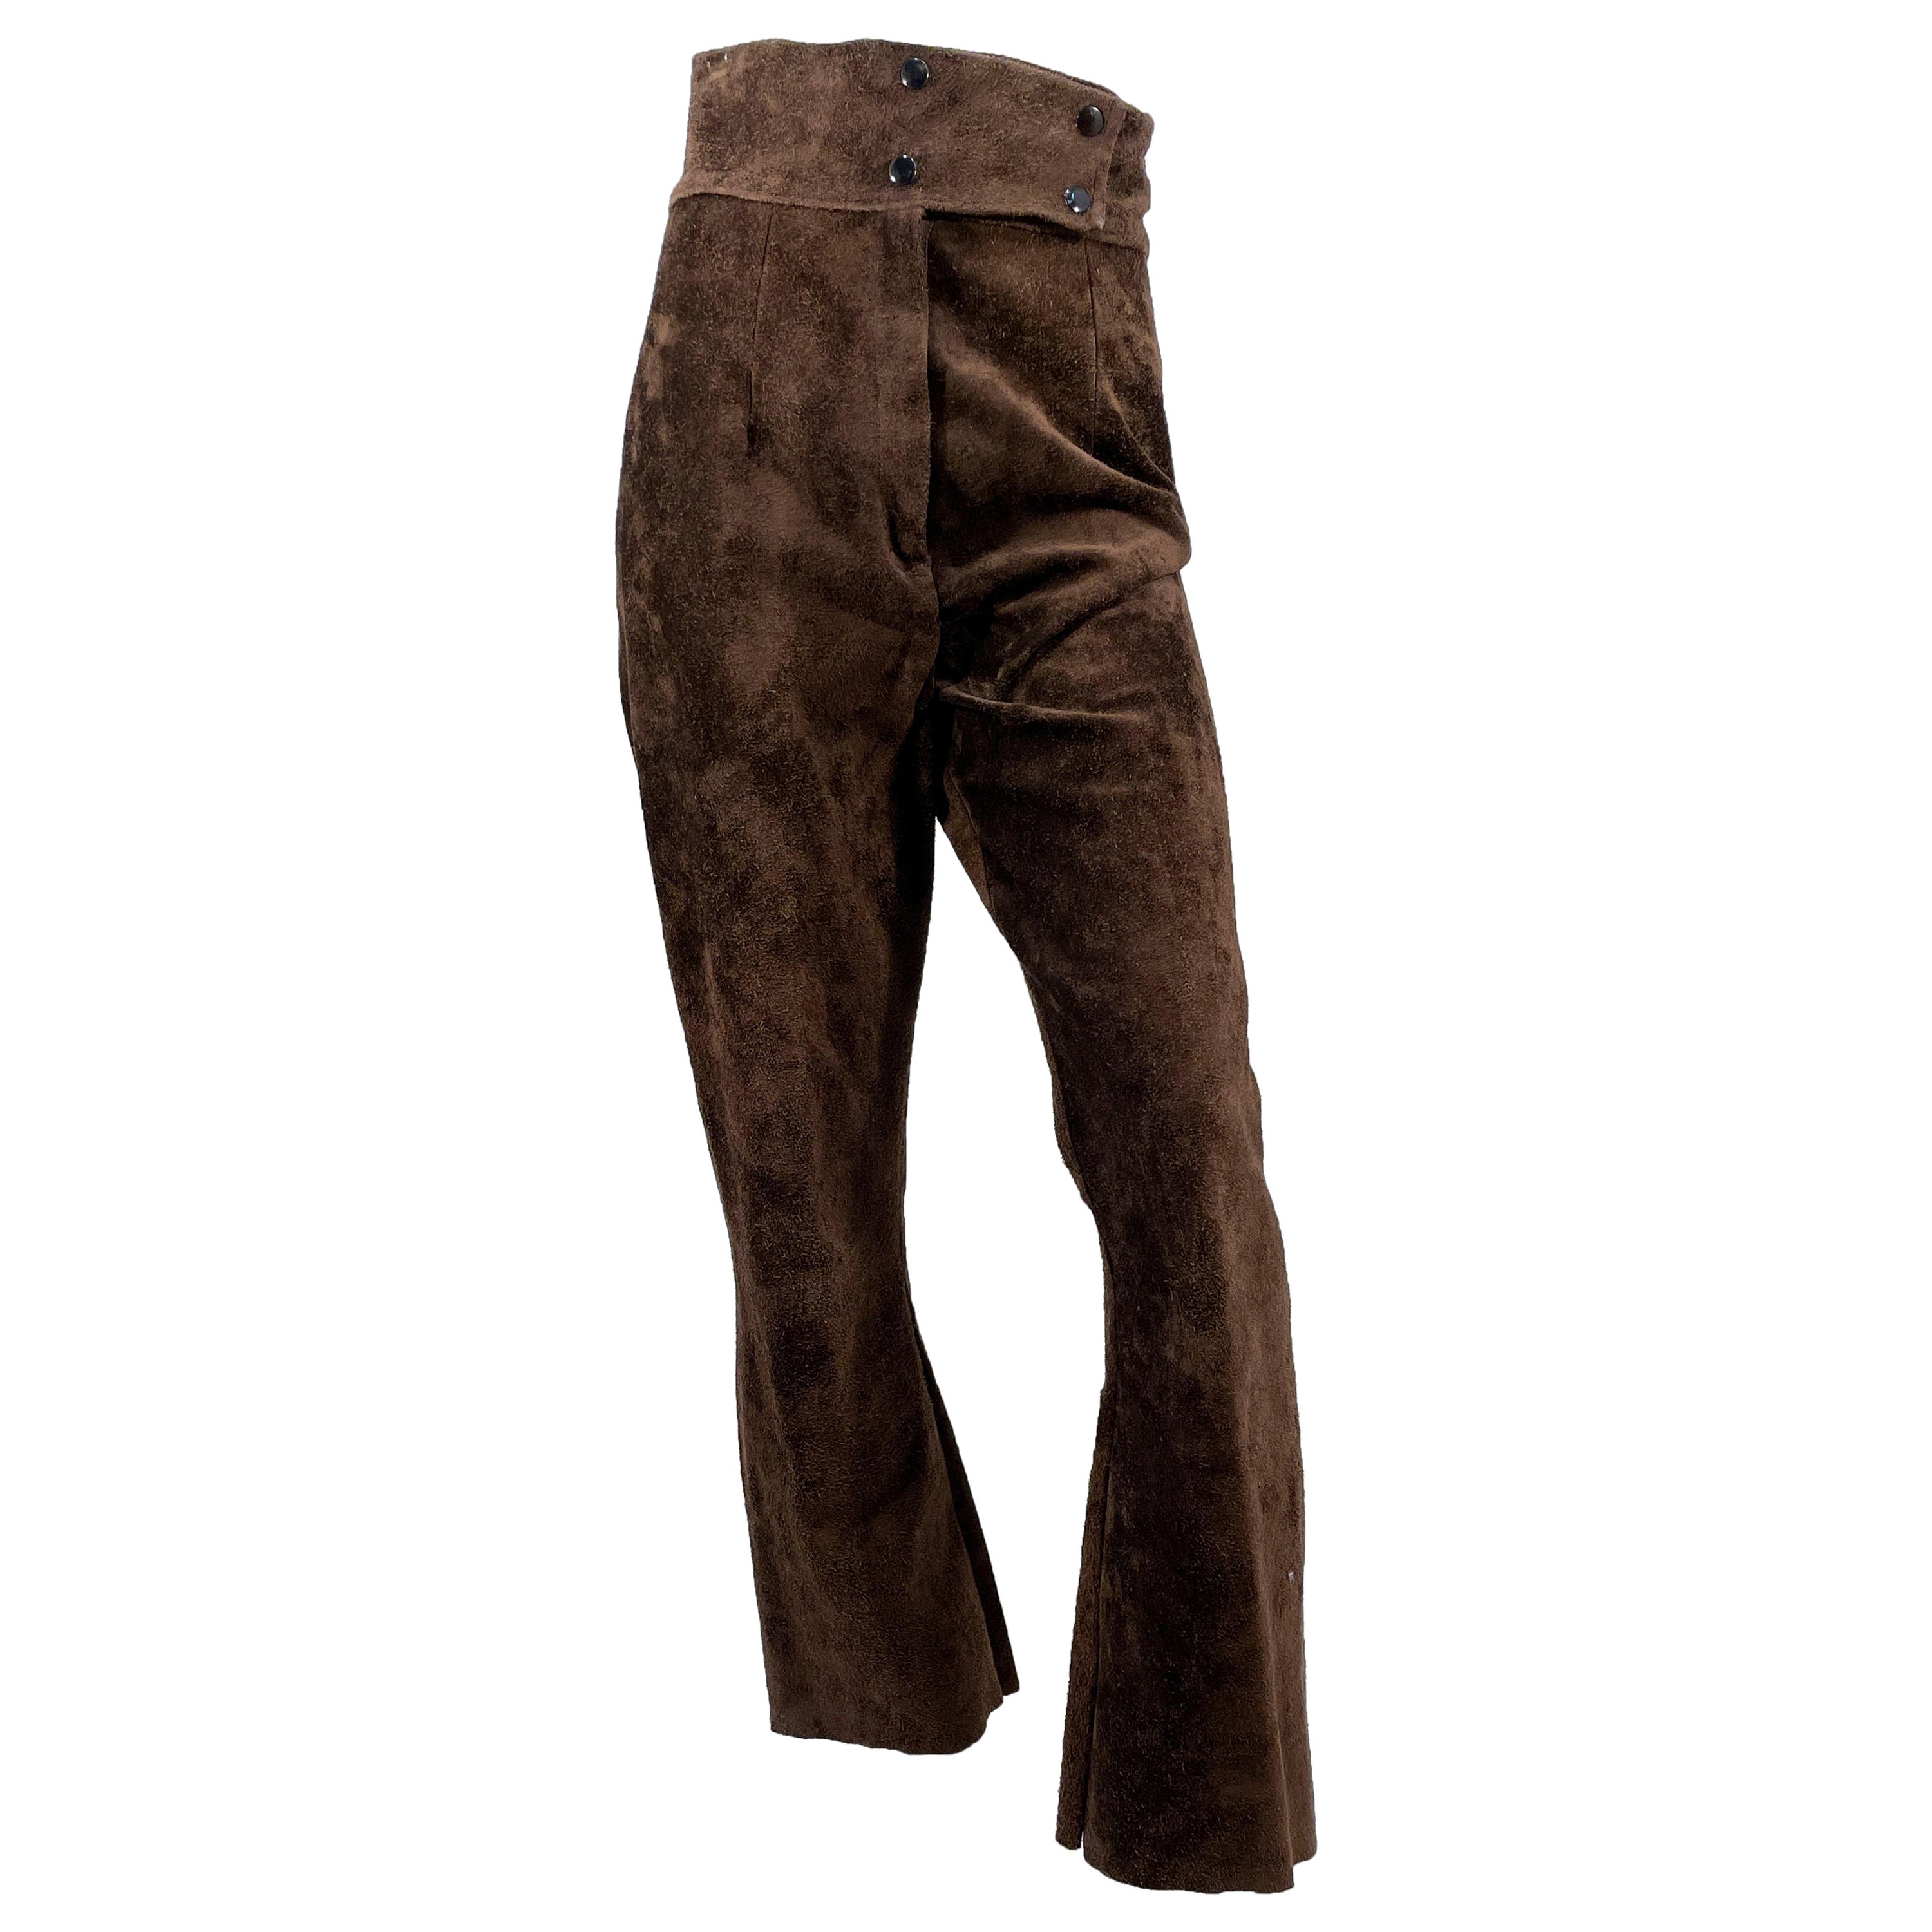 1960s/1970s Chocolate Brown Suede Pants For Sale